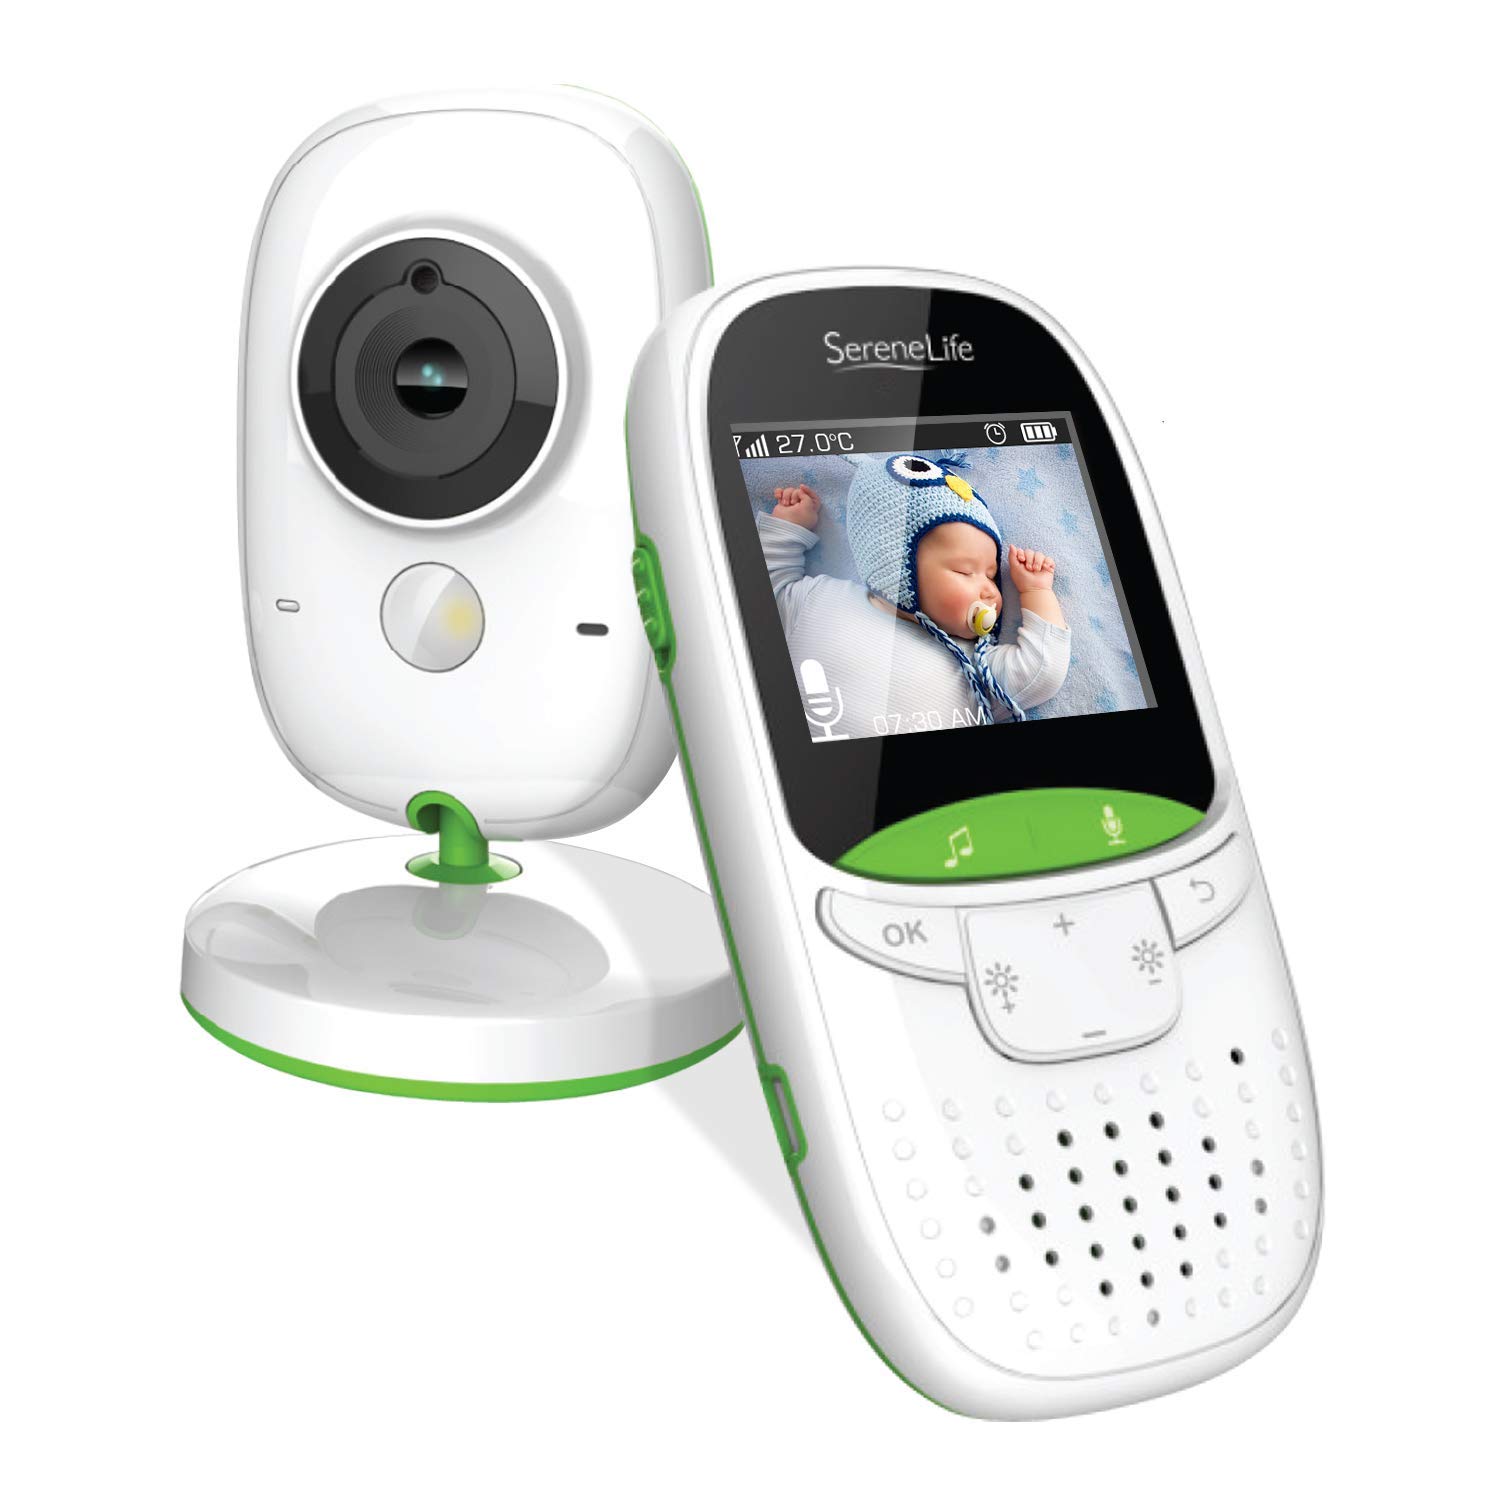 SereneLife Wireless Video Baby Monitor